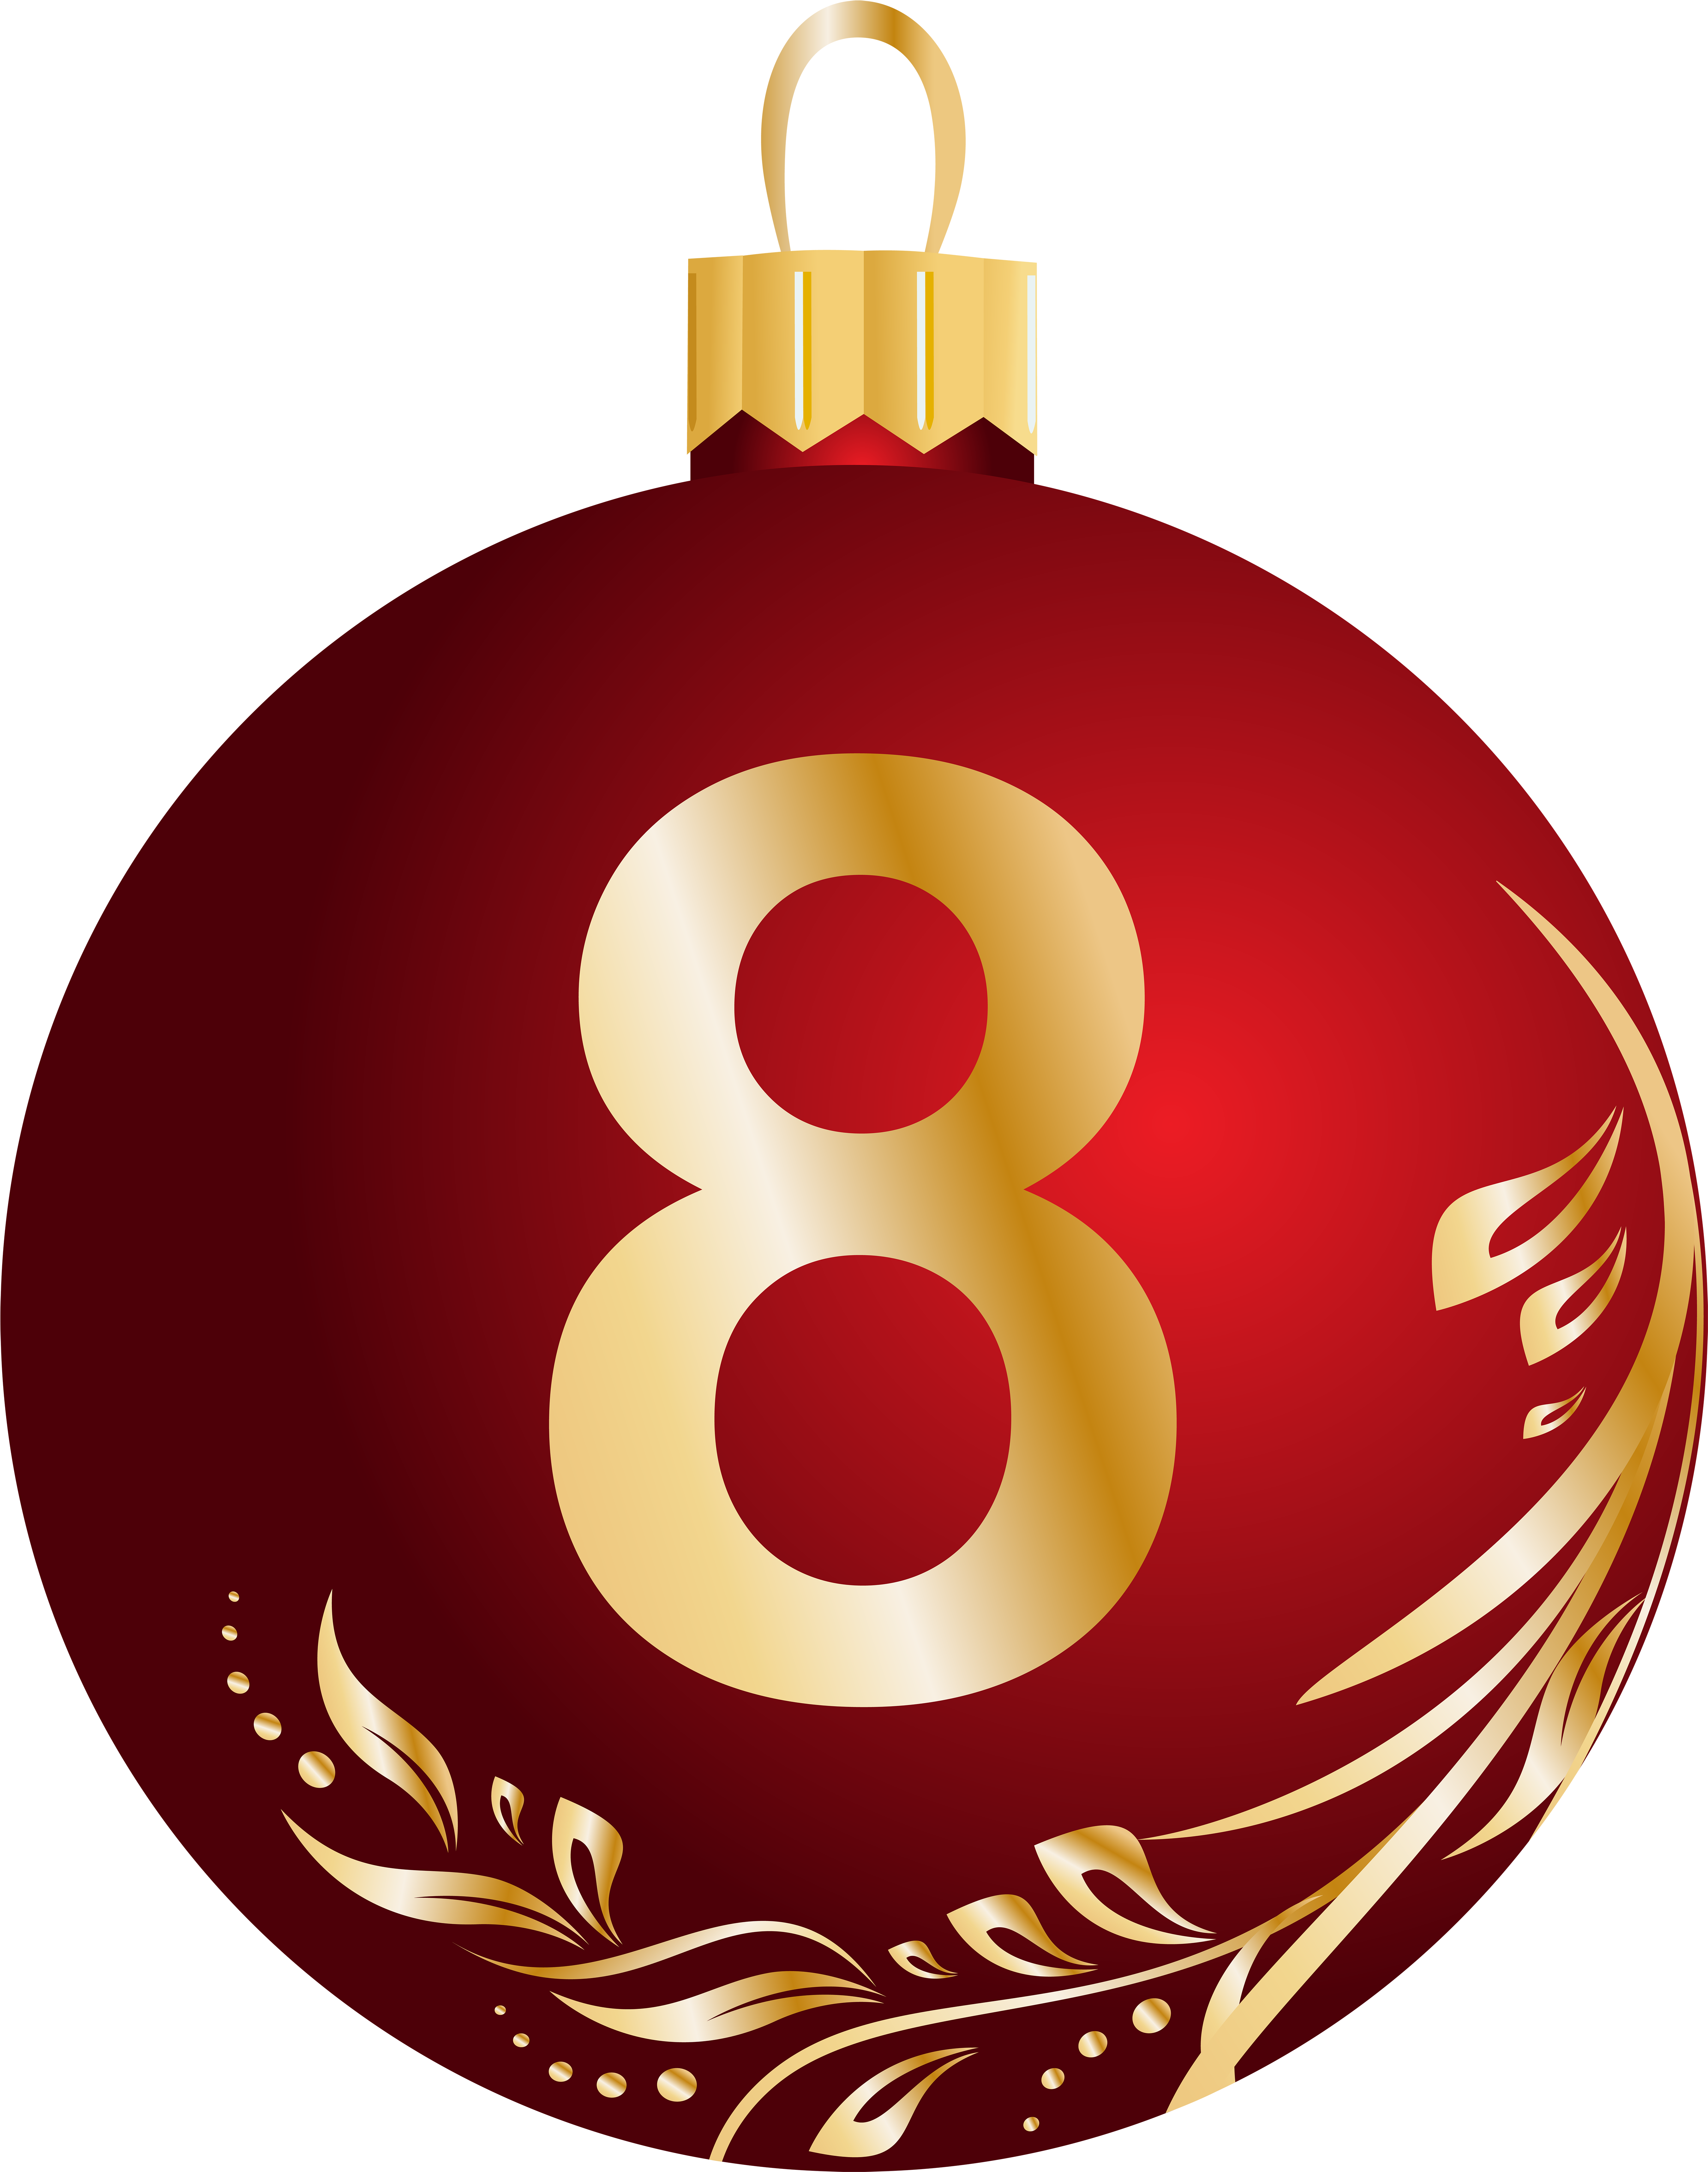 A Red And Gold Christmas Ornament